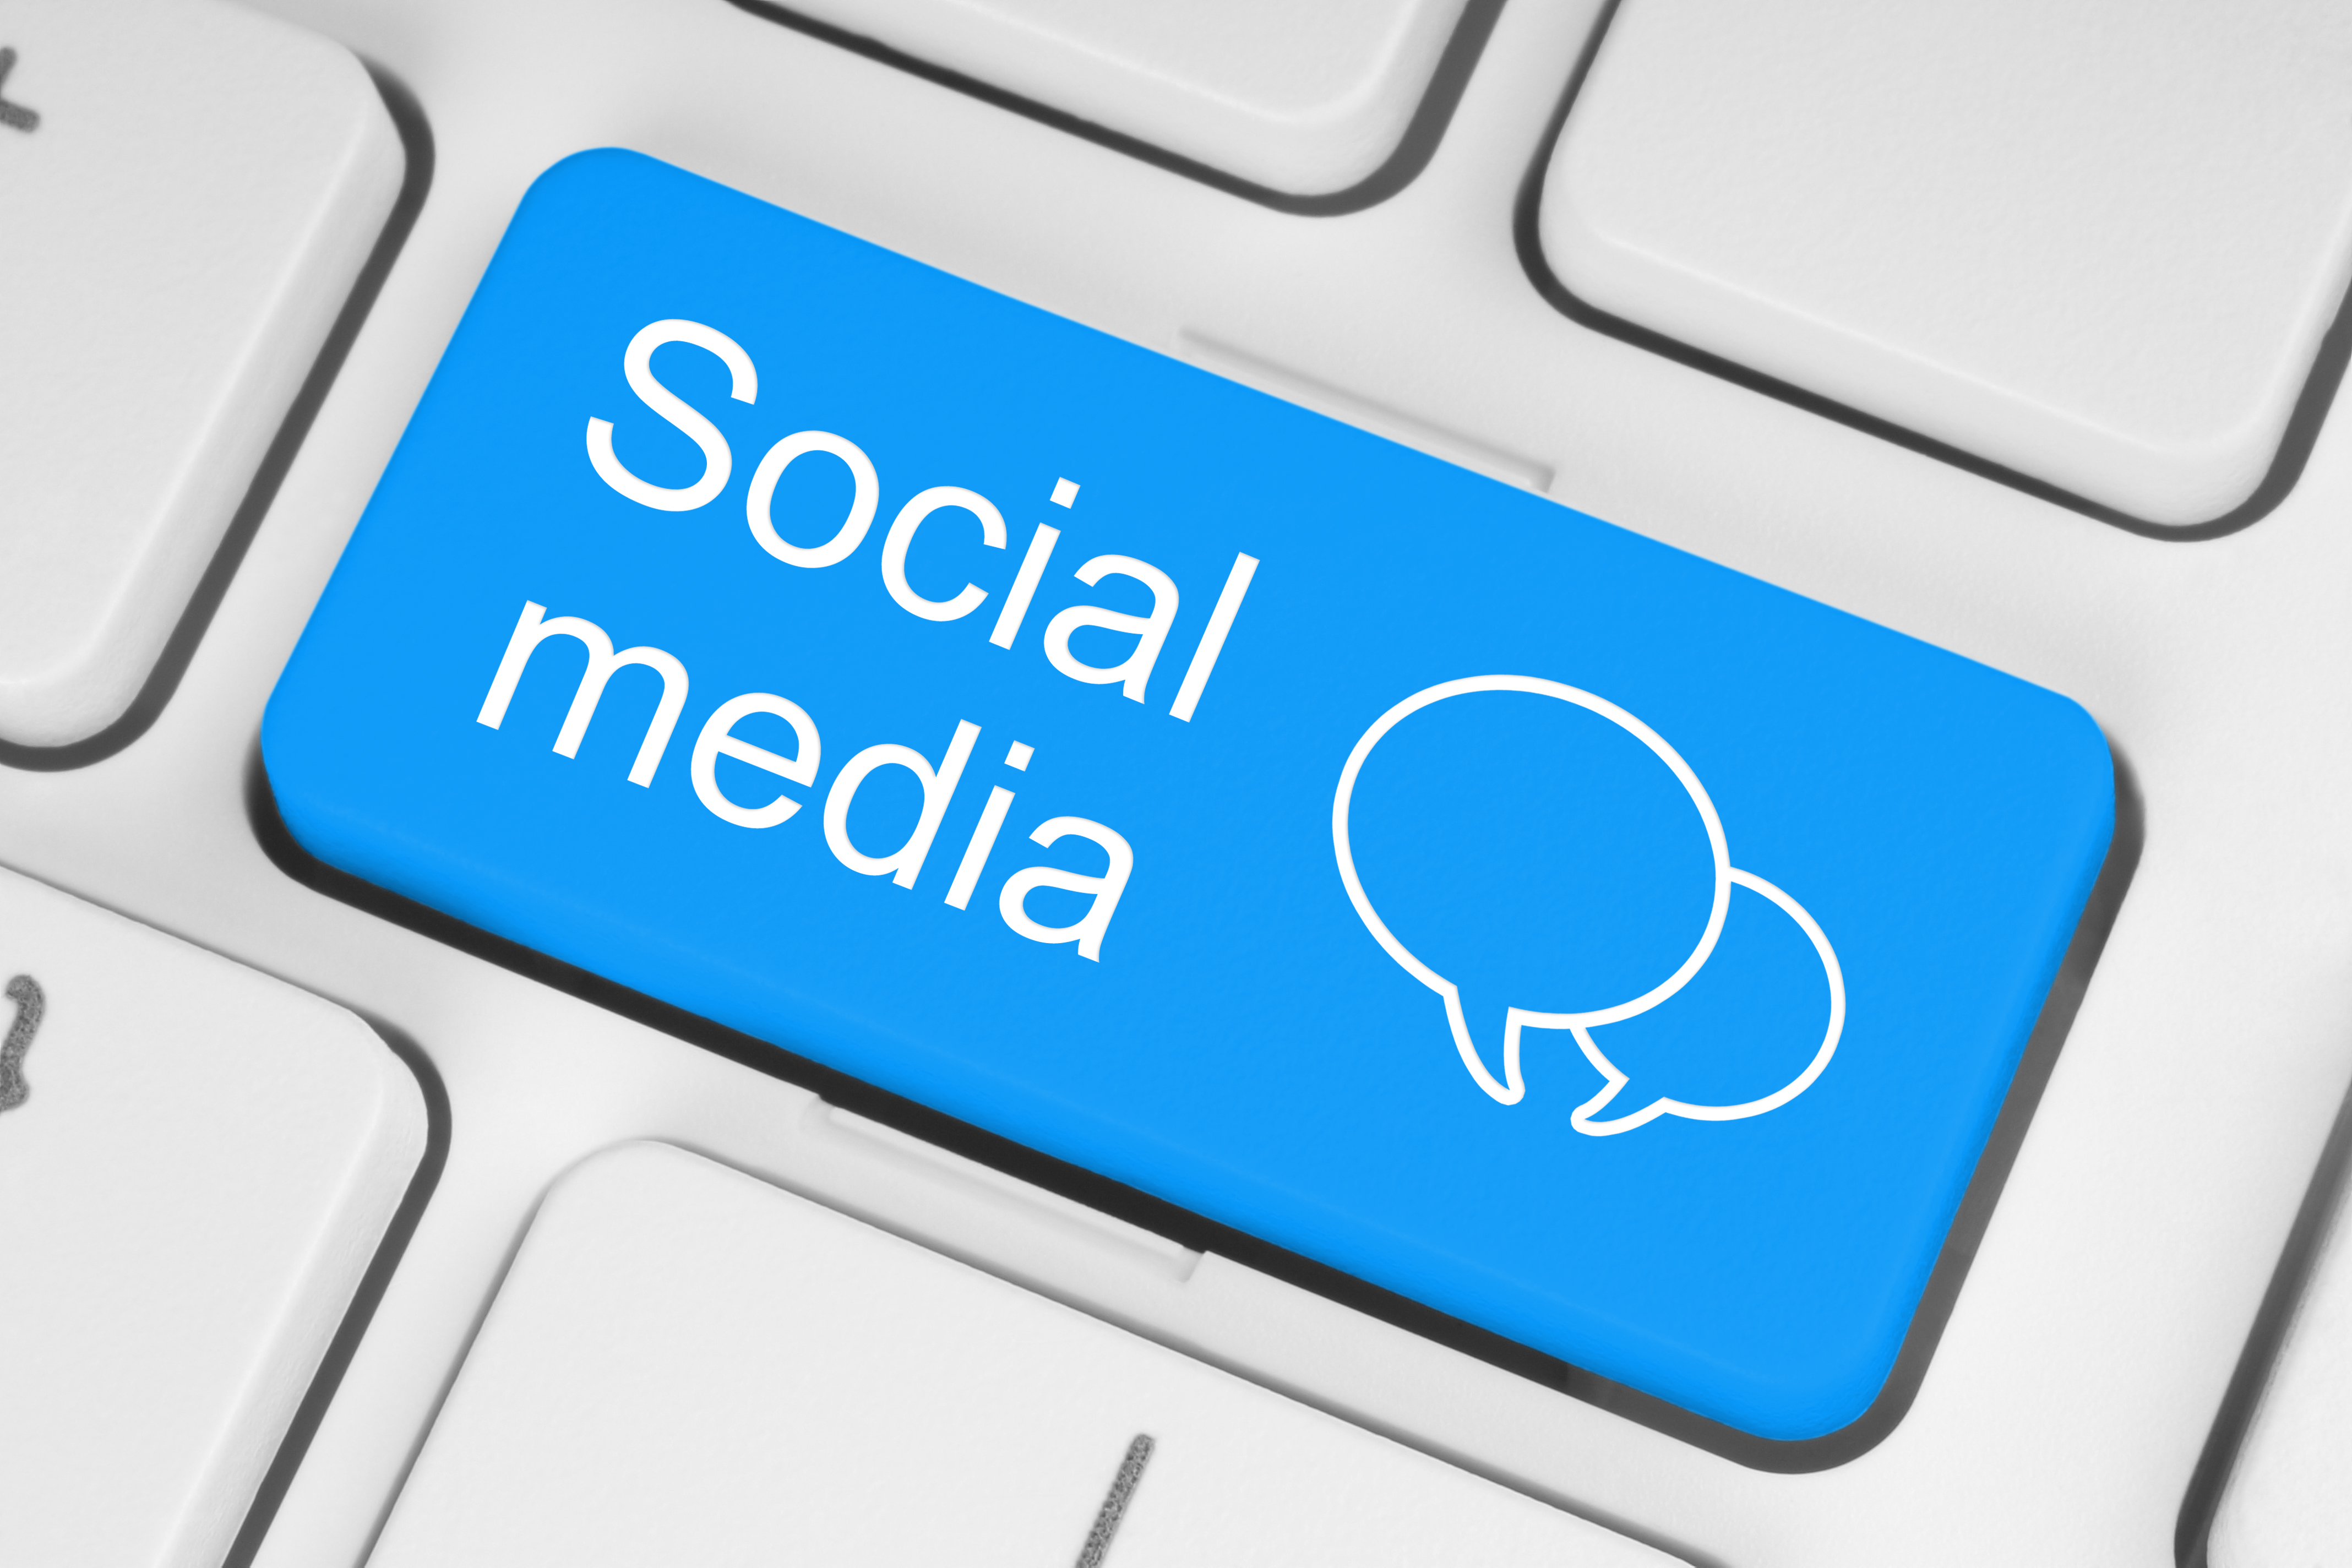 4 Steps To Building An Engaging Presence On Social Media